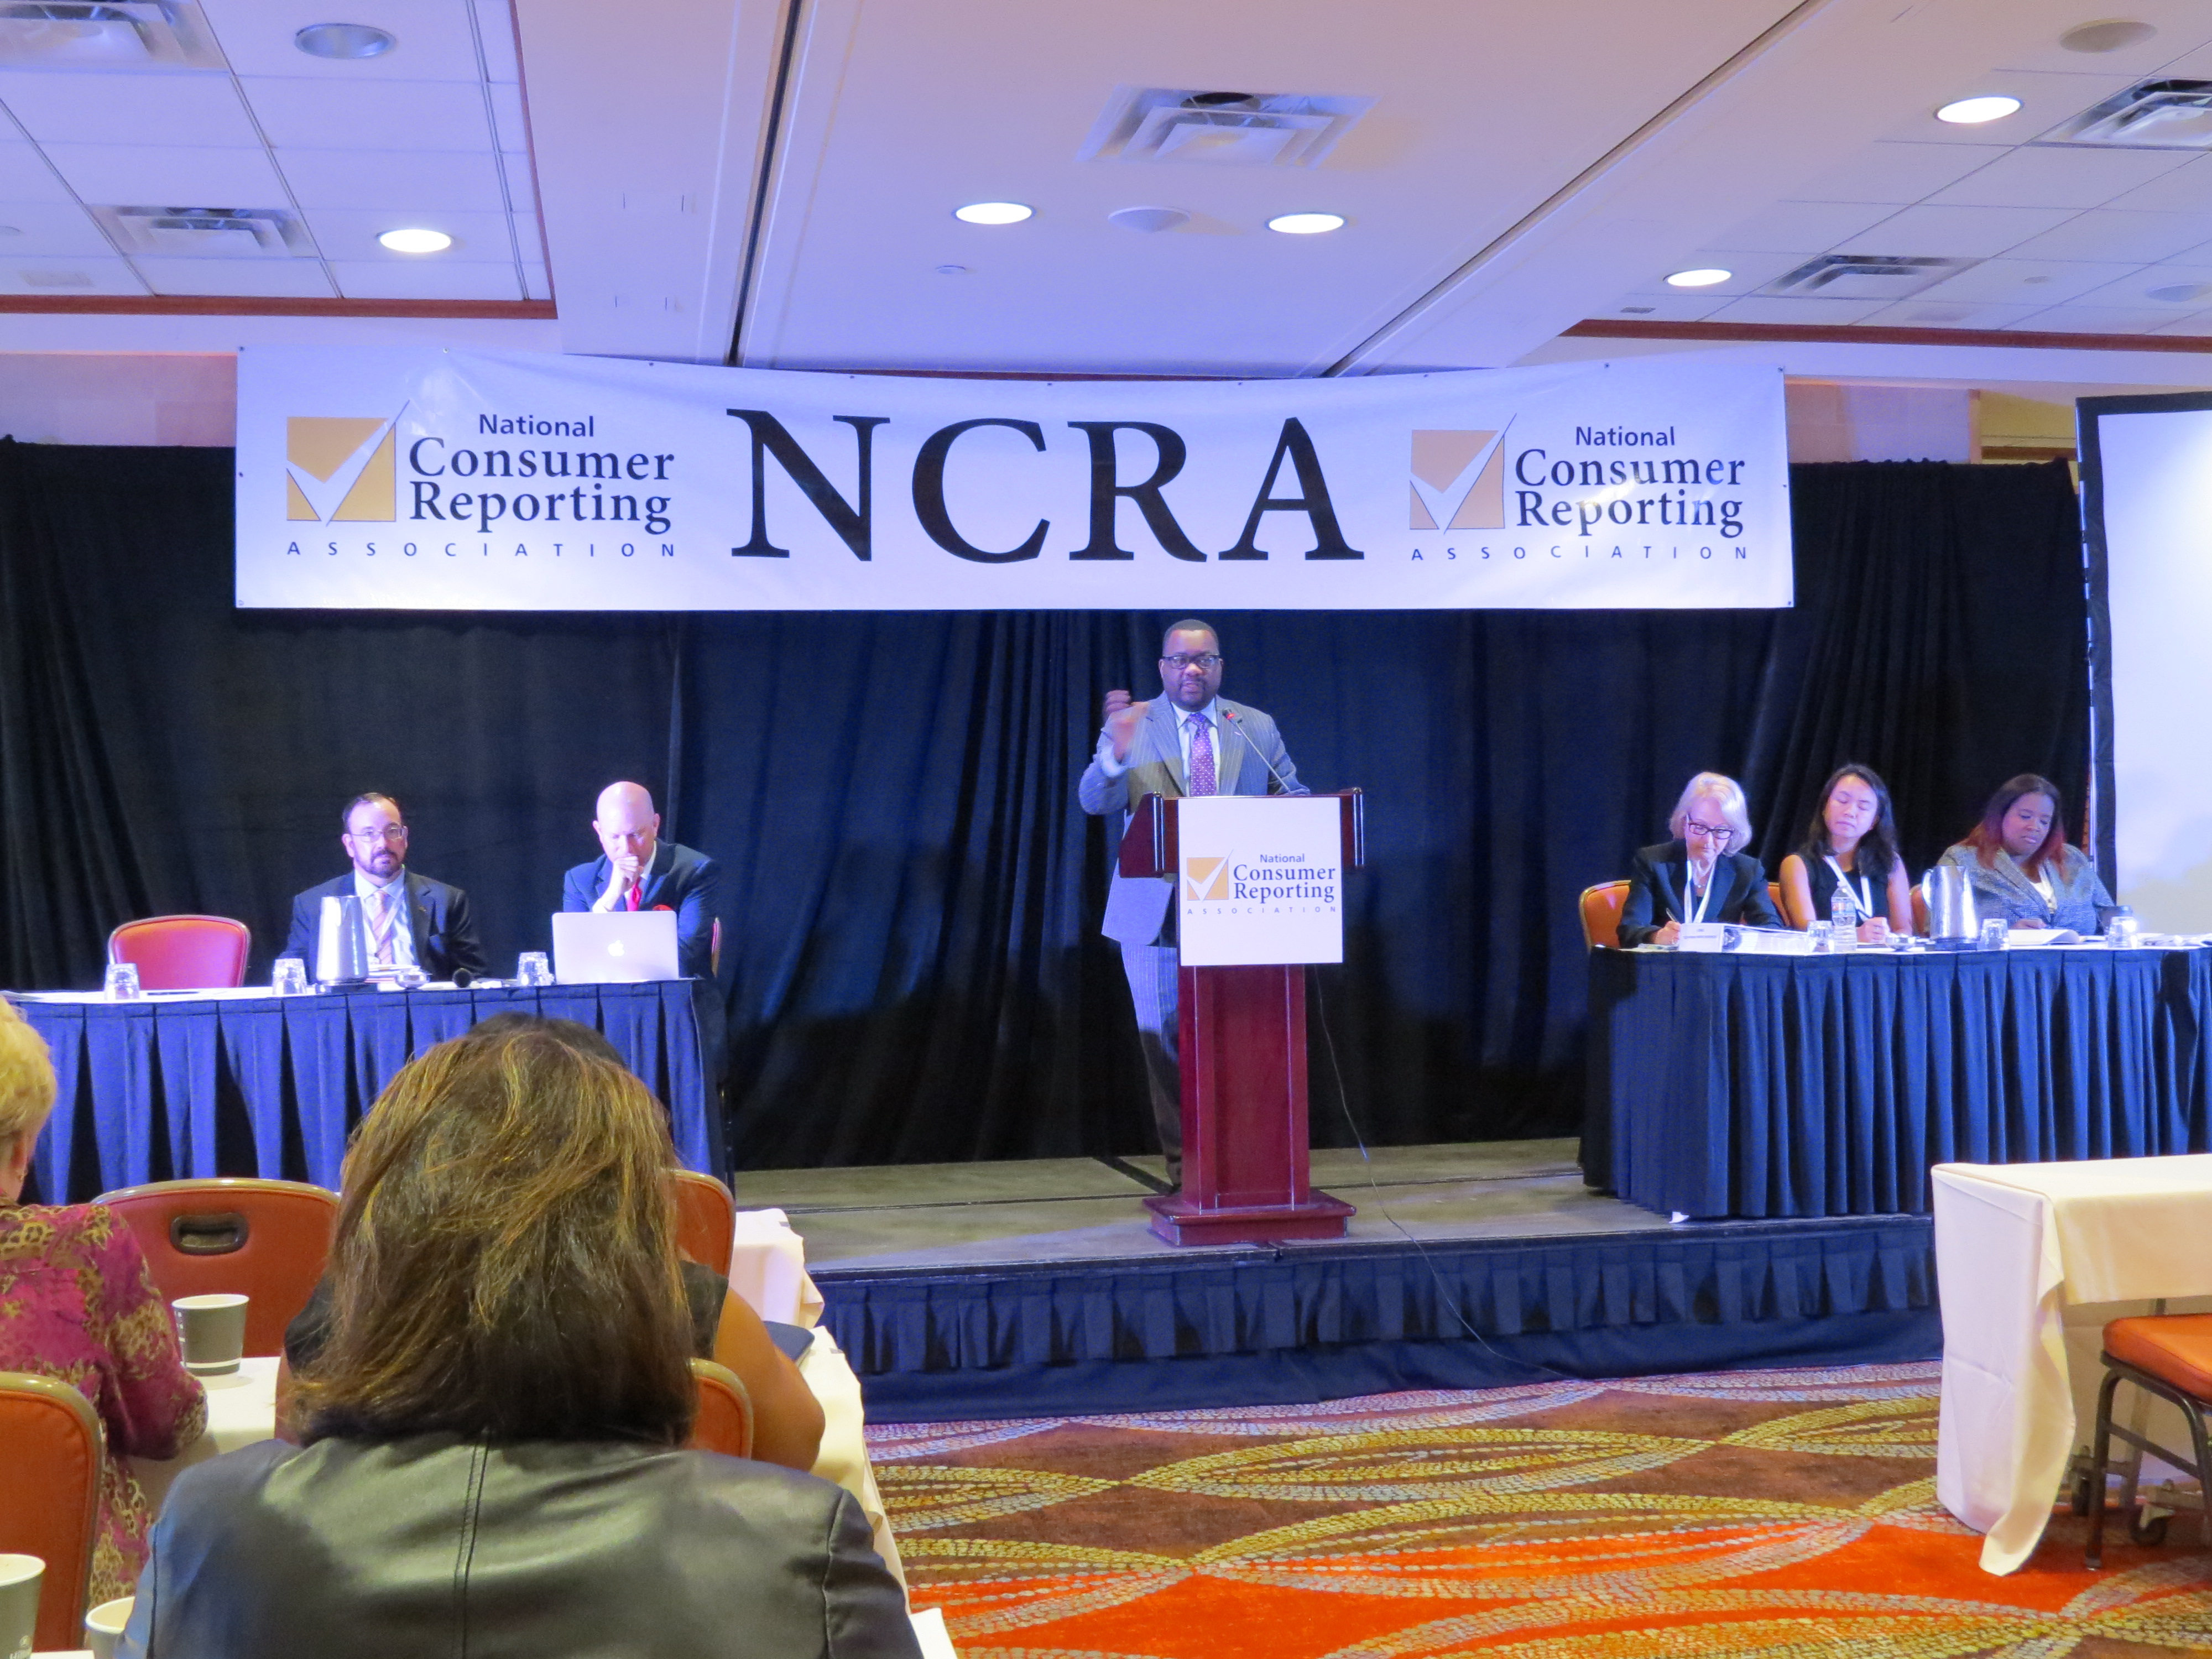 The informative HUD Panel Discussion during NCRA’s Annual Conference